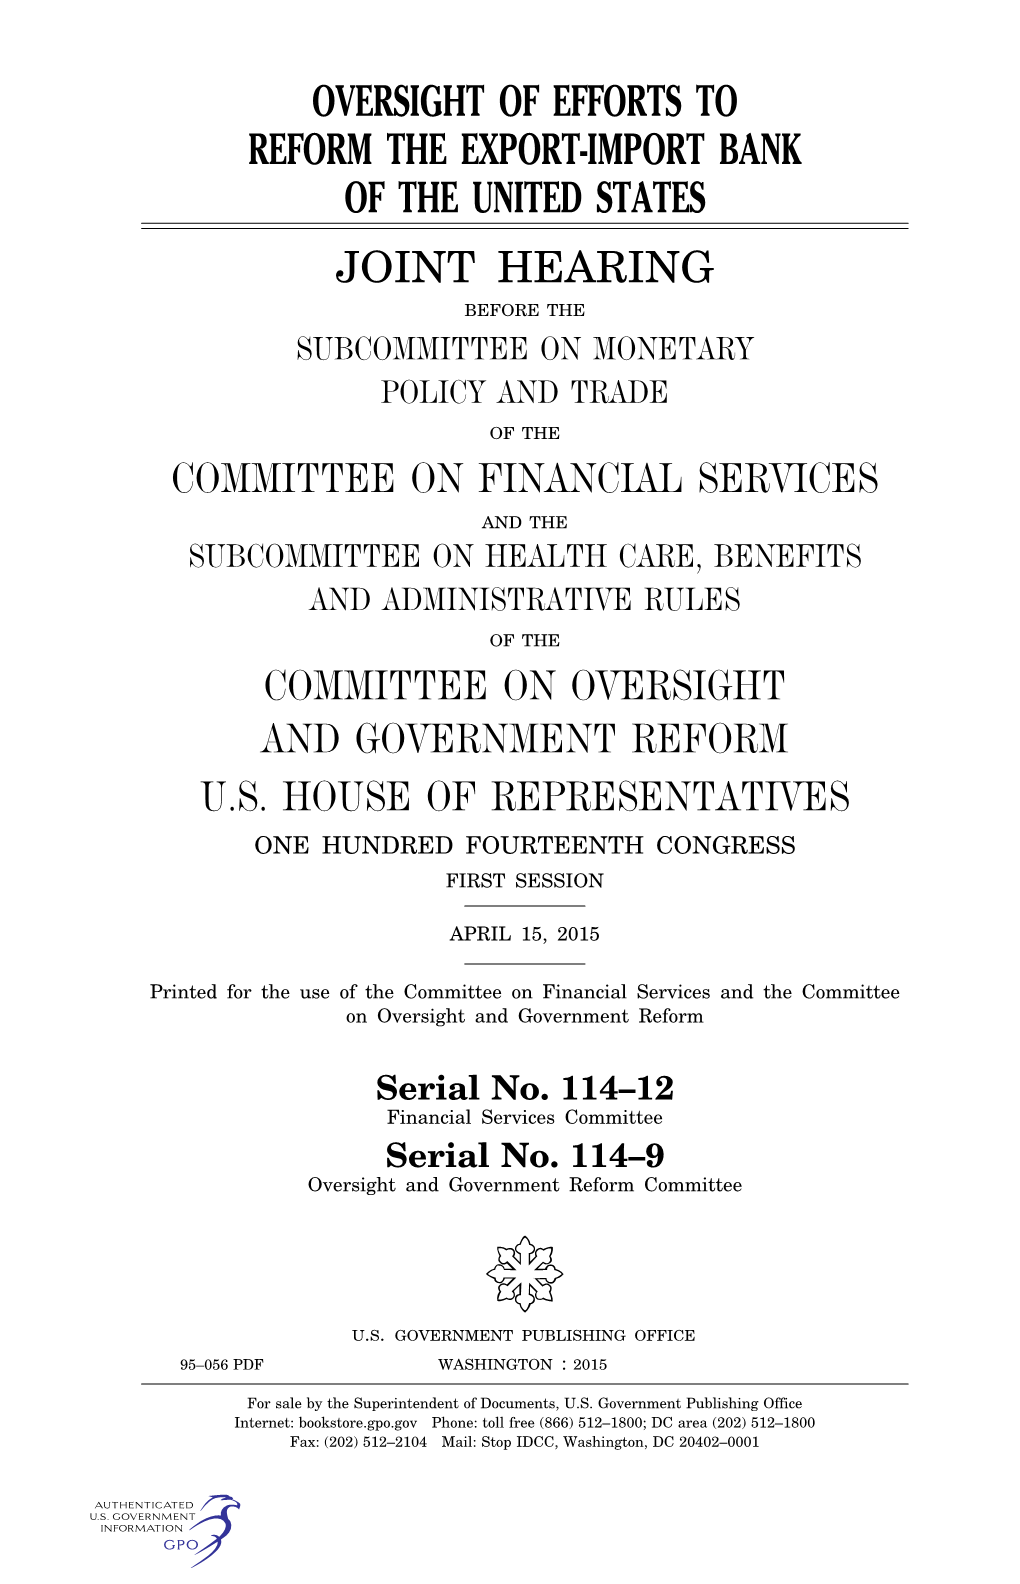 Oversight of Efforts to Reform the Export-Import Bank of the United States Joint Hearing Before the Subcommittee on Monetary Policy and Trade